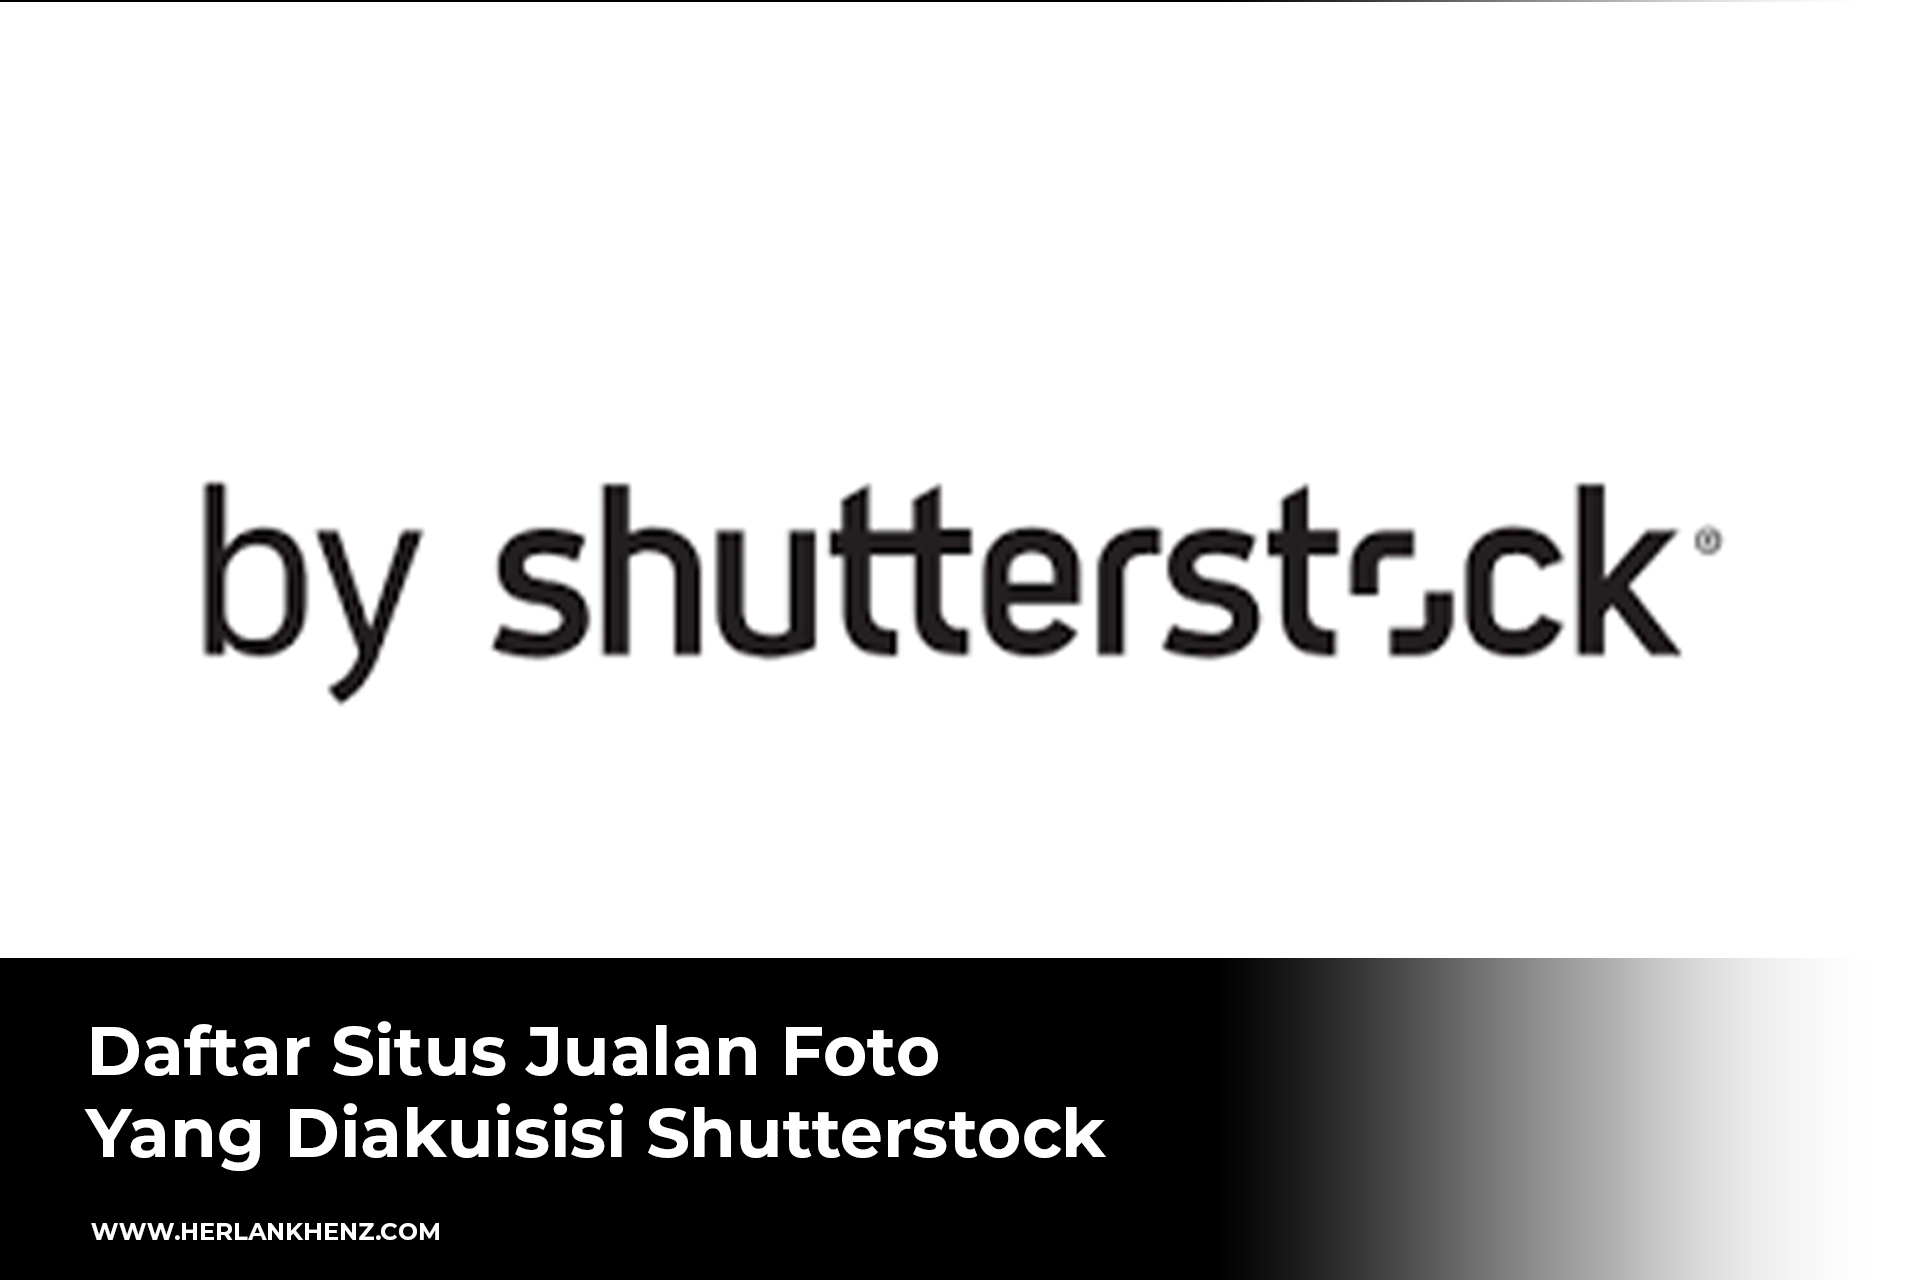 List of Photo Selling Sites Acquired by Shutterstock